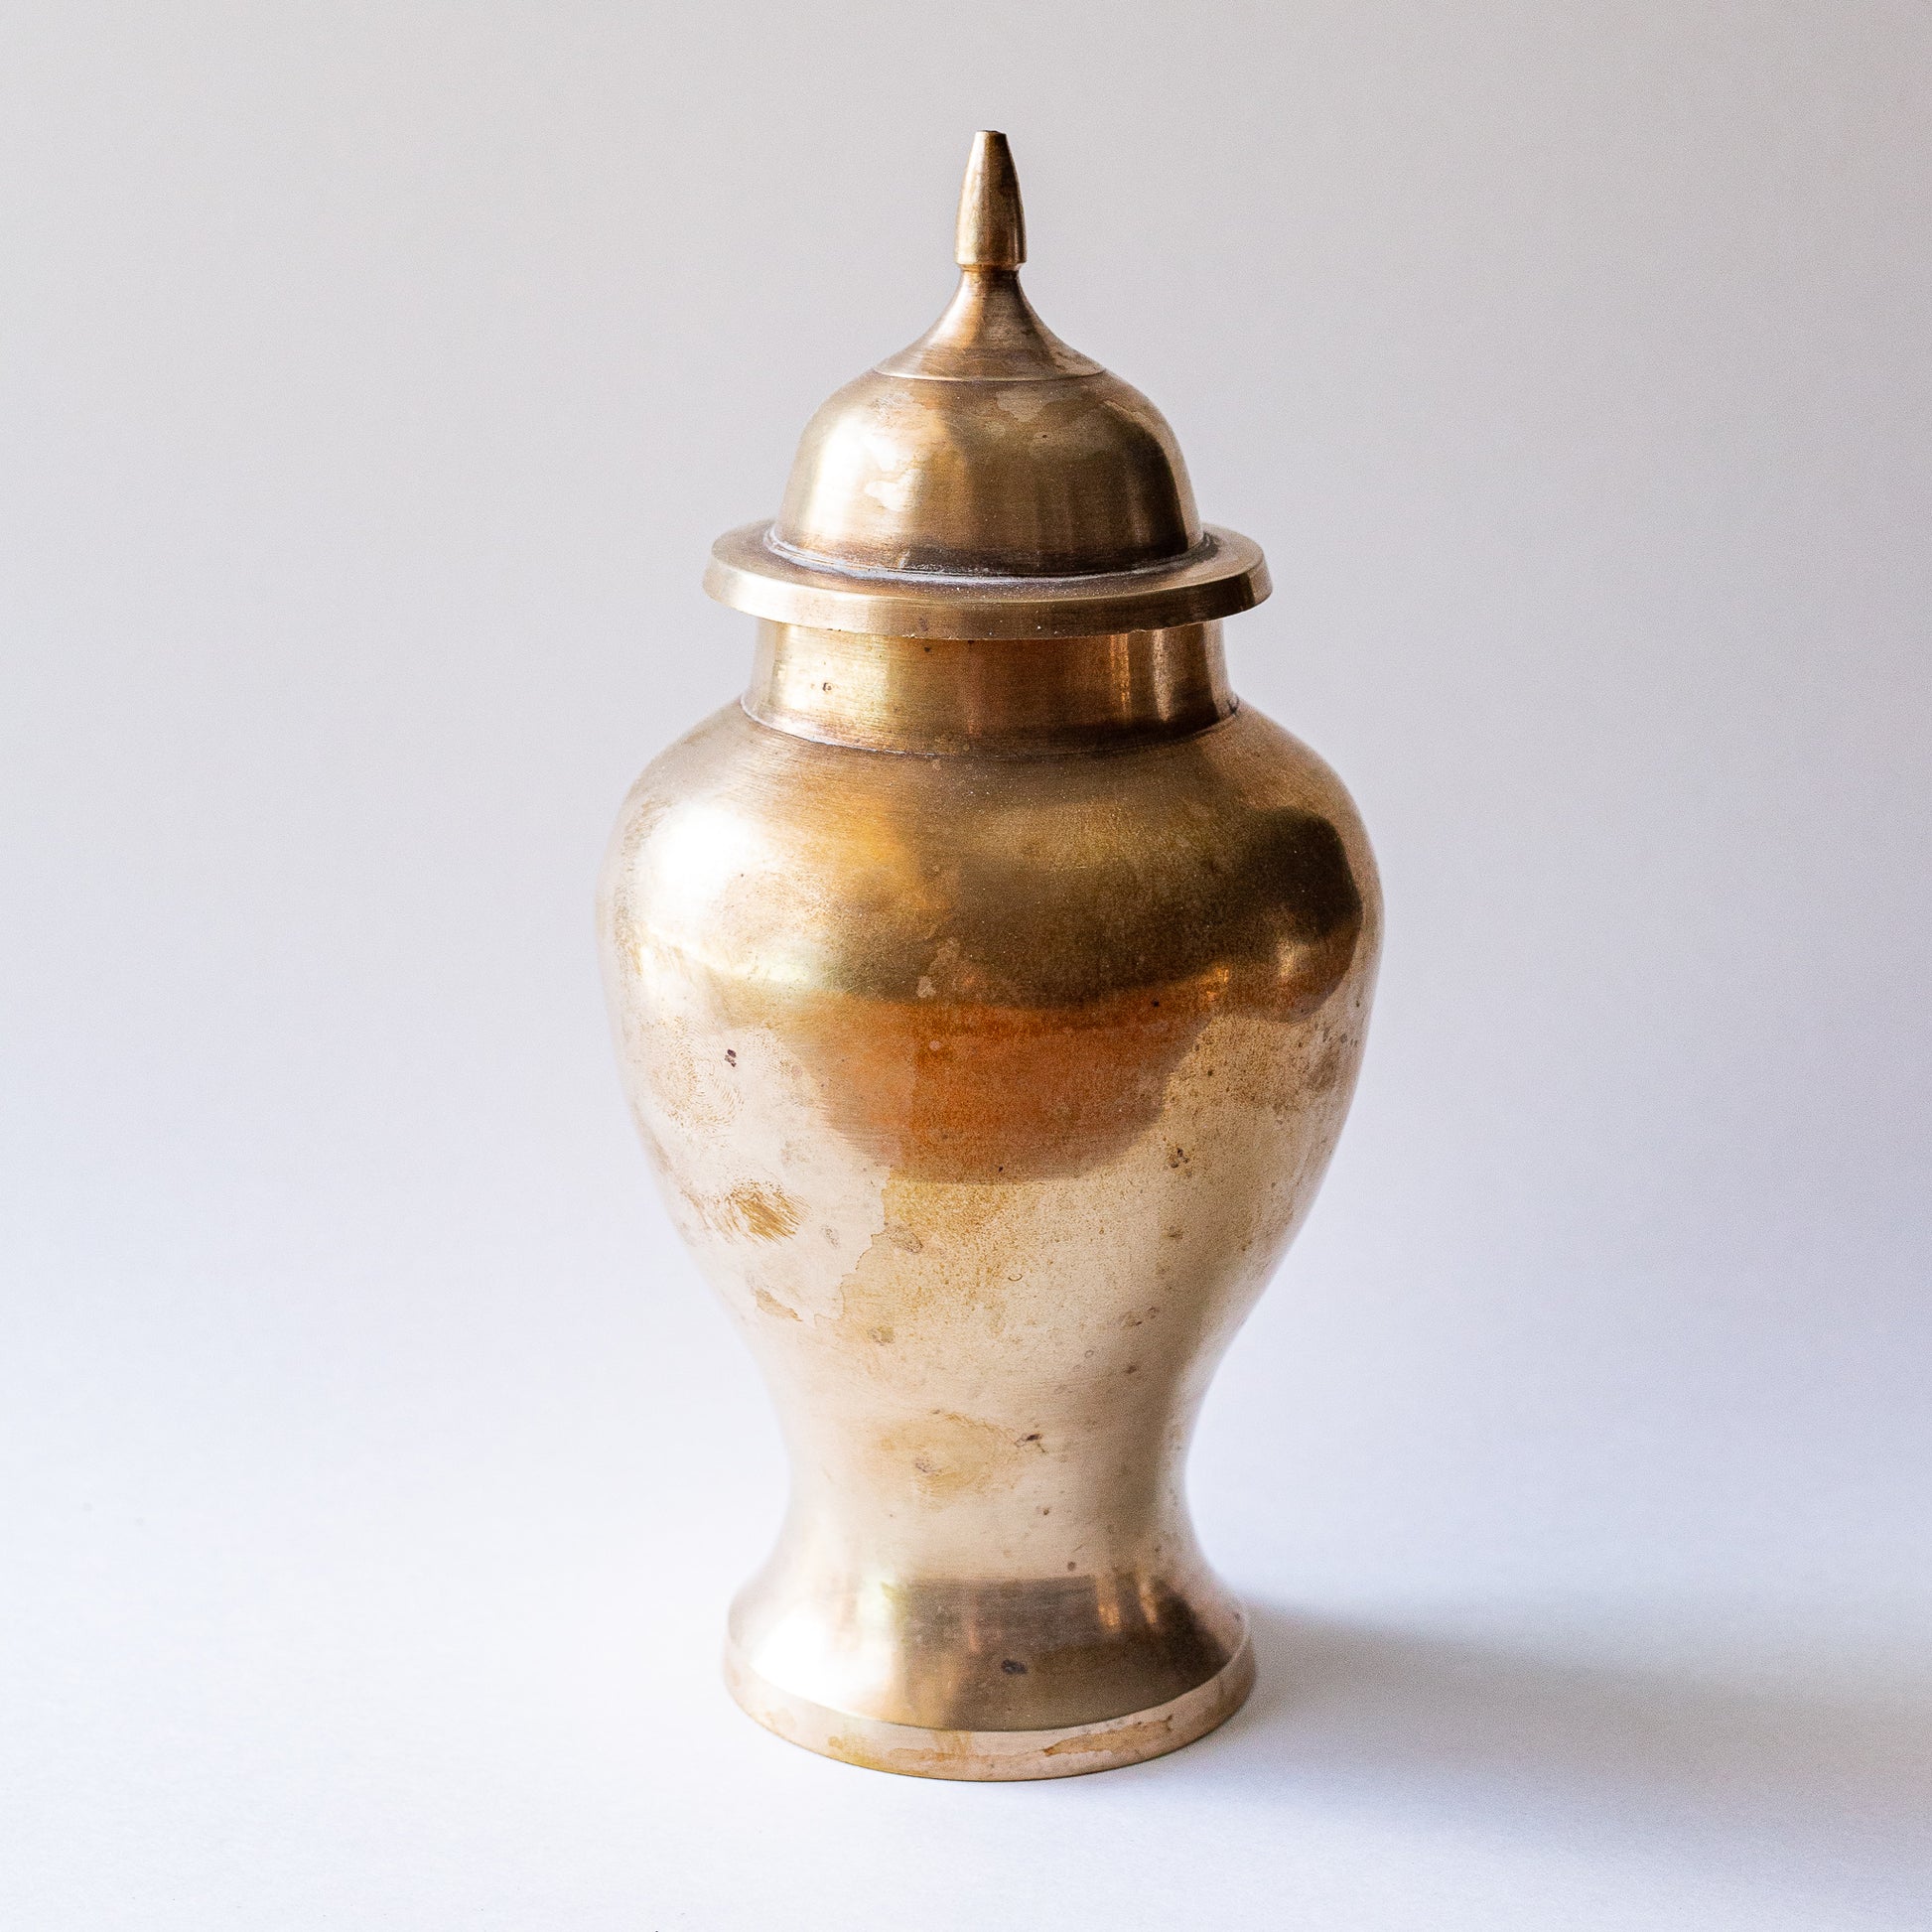 Lidded brass temple jar, measured 9 inches tall.